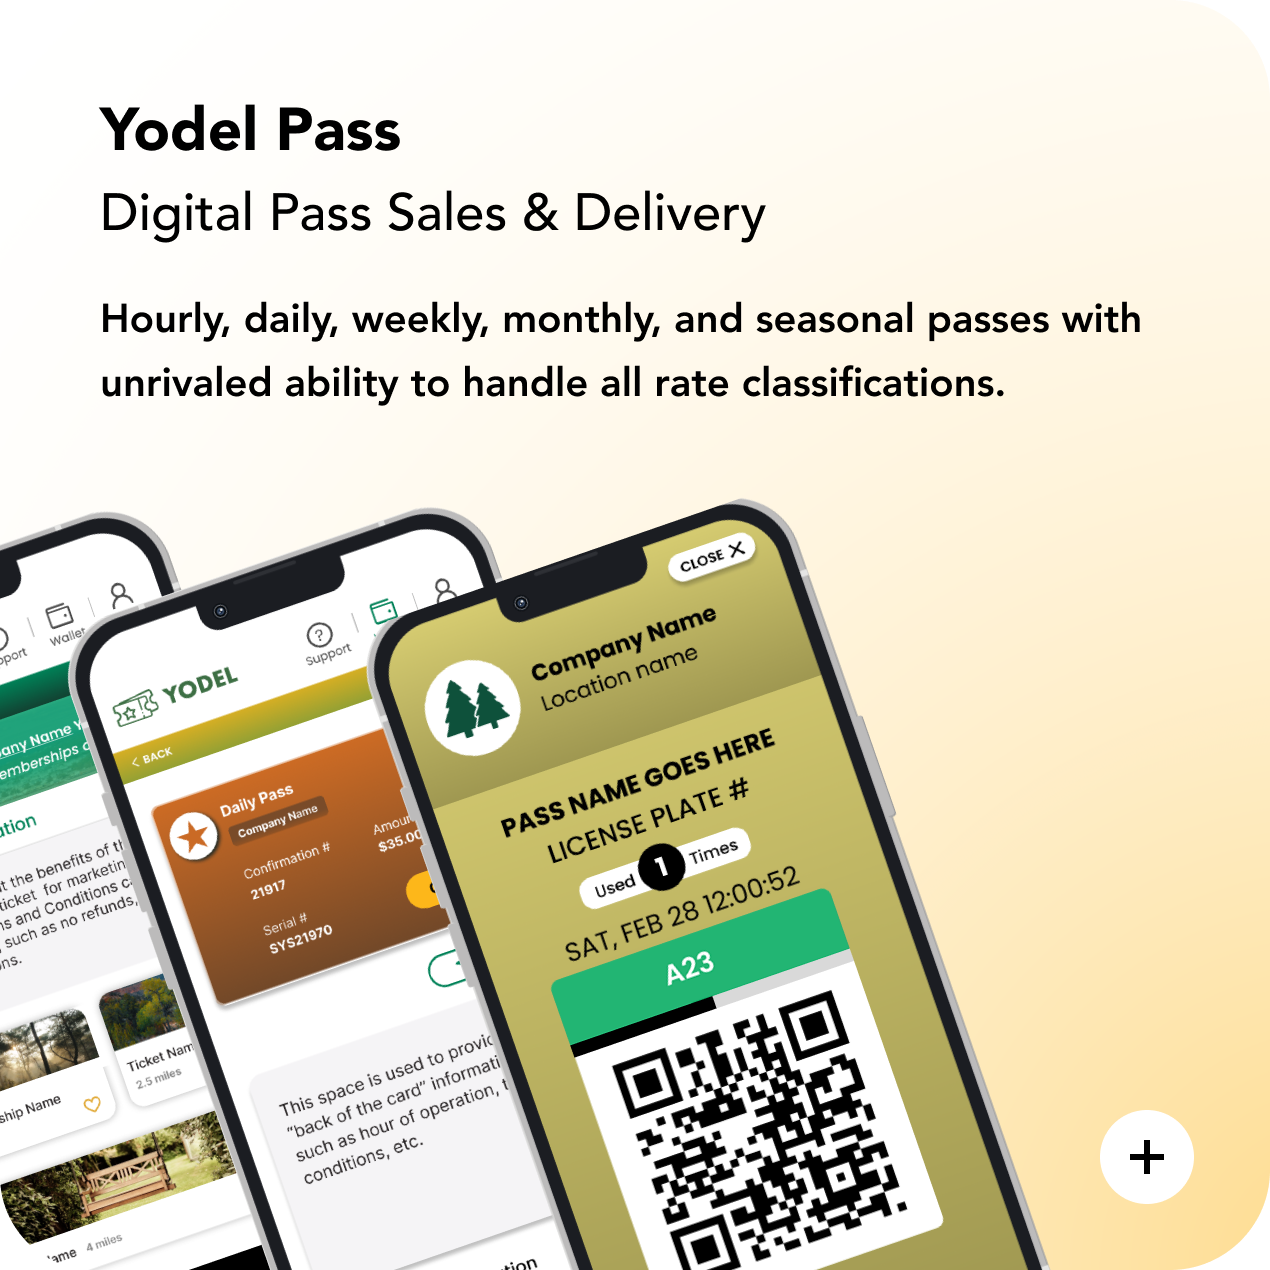 Yodel Pass: Digital Pass Sales & Delivery.